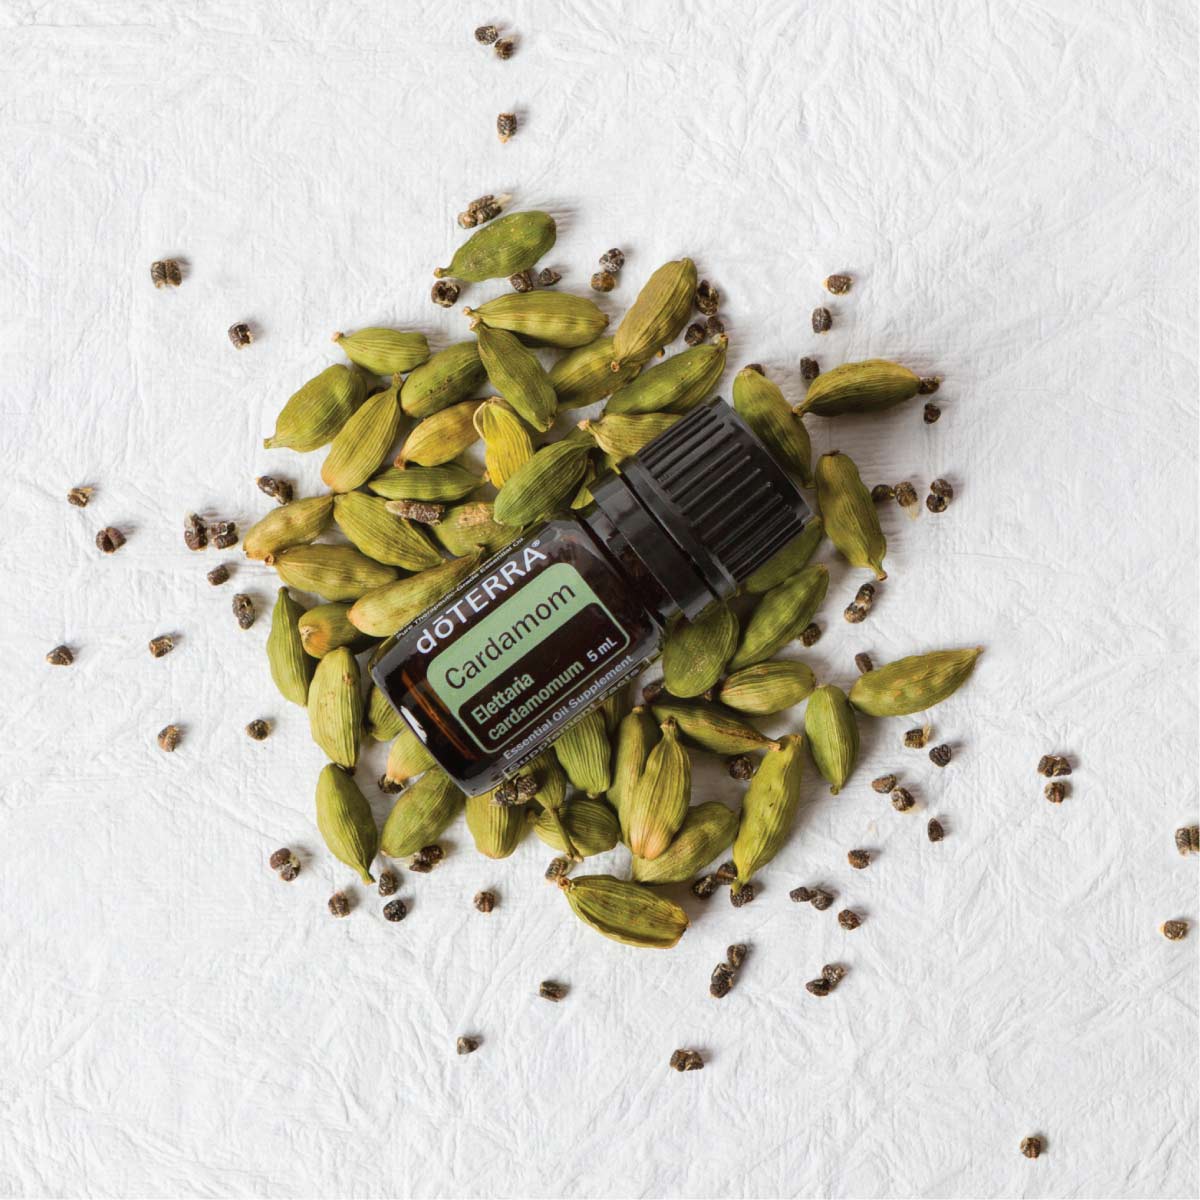 Bottle of doTERRA Cardamom essential oil and fresh cardamom seeds. What are the benefits of Cardamom essential oil? Cardamom oil is known for its benefits for the skin, digestive system, respiratory system, and for adding flavor when cooking.*